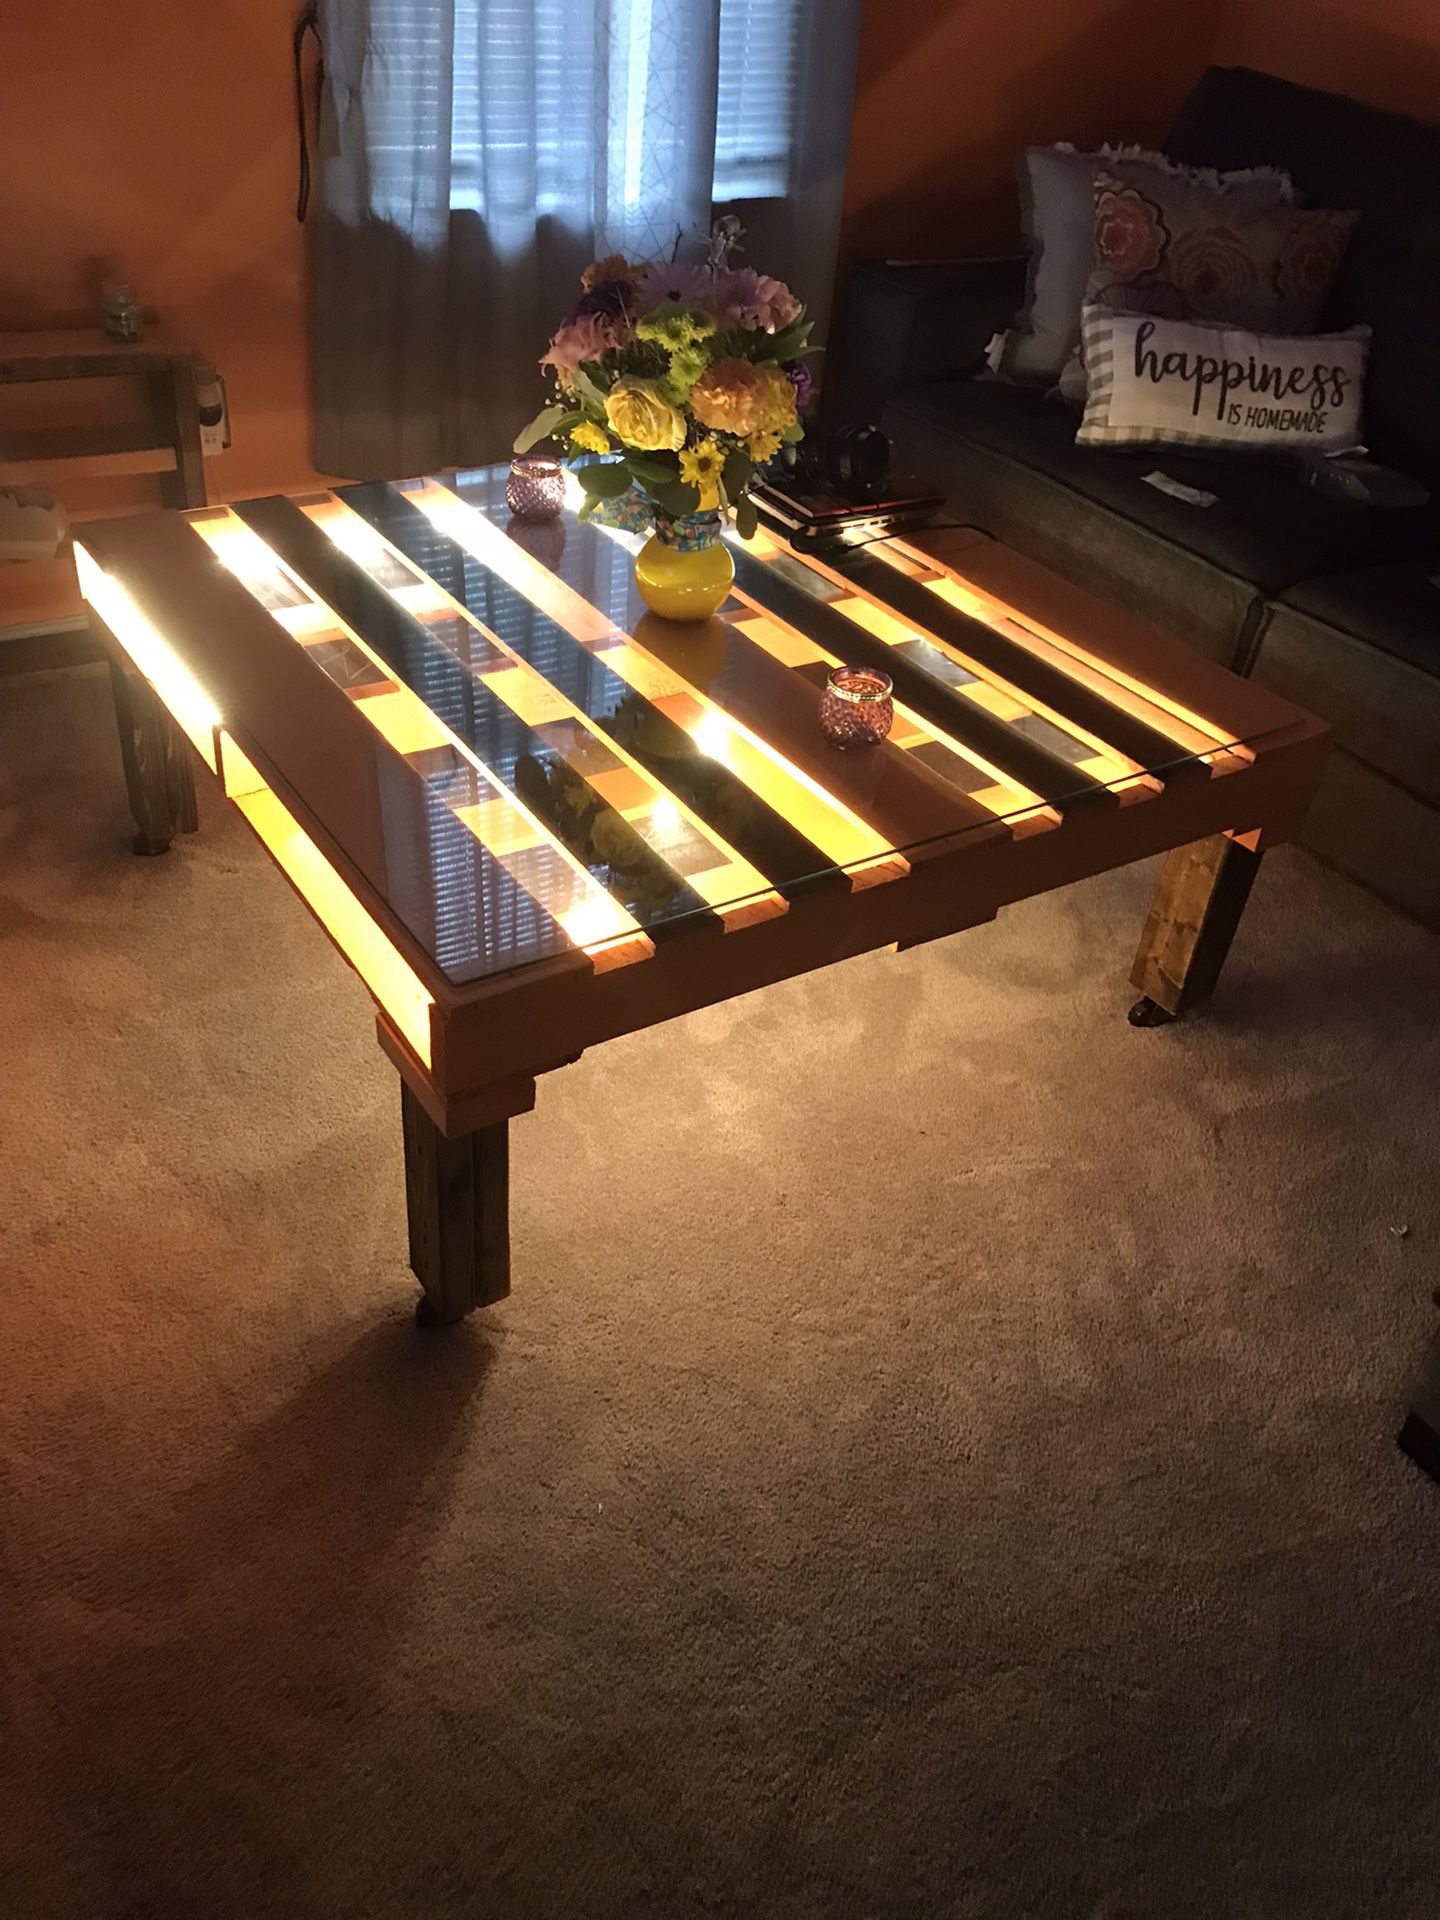 Farmhouse Coffee Table On Caster Wheels  With  Glass  On Top With Remote LED Lights 